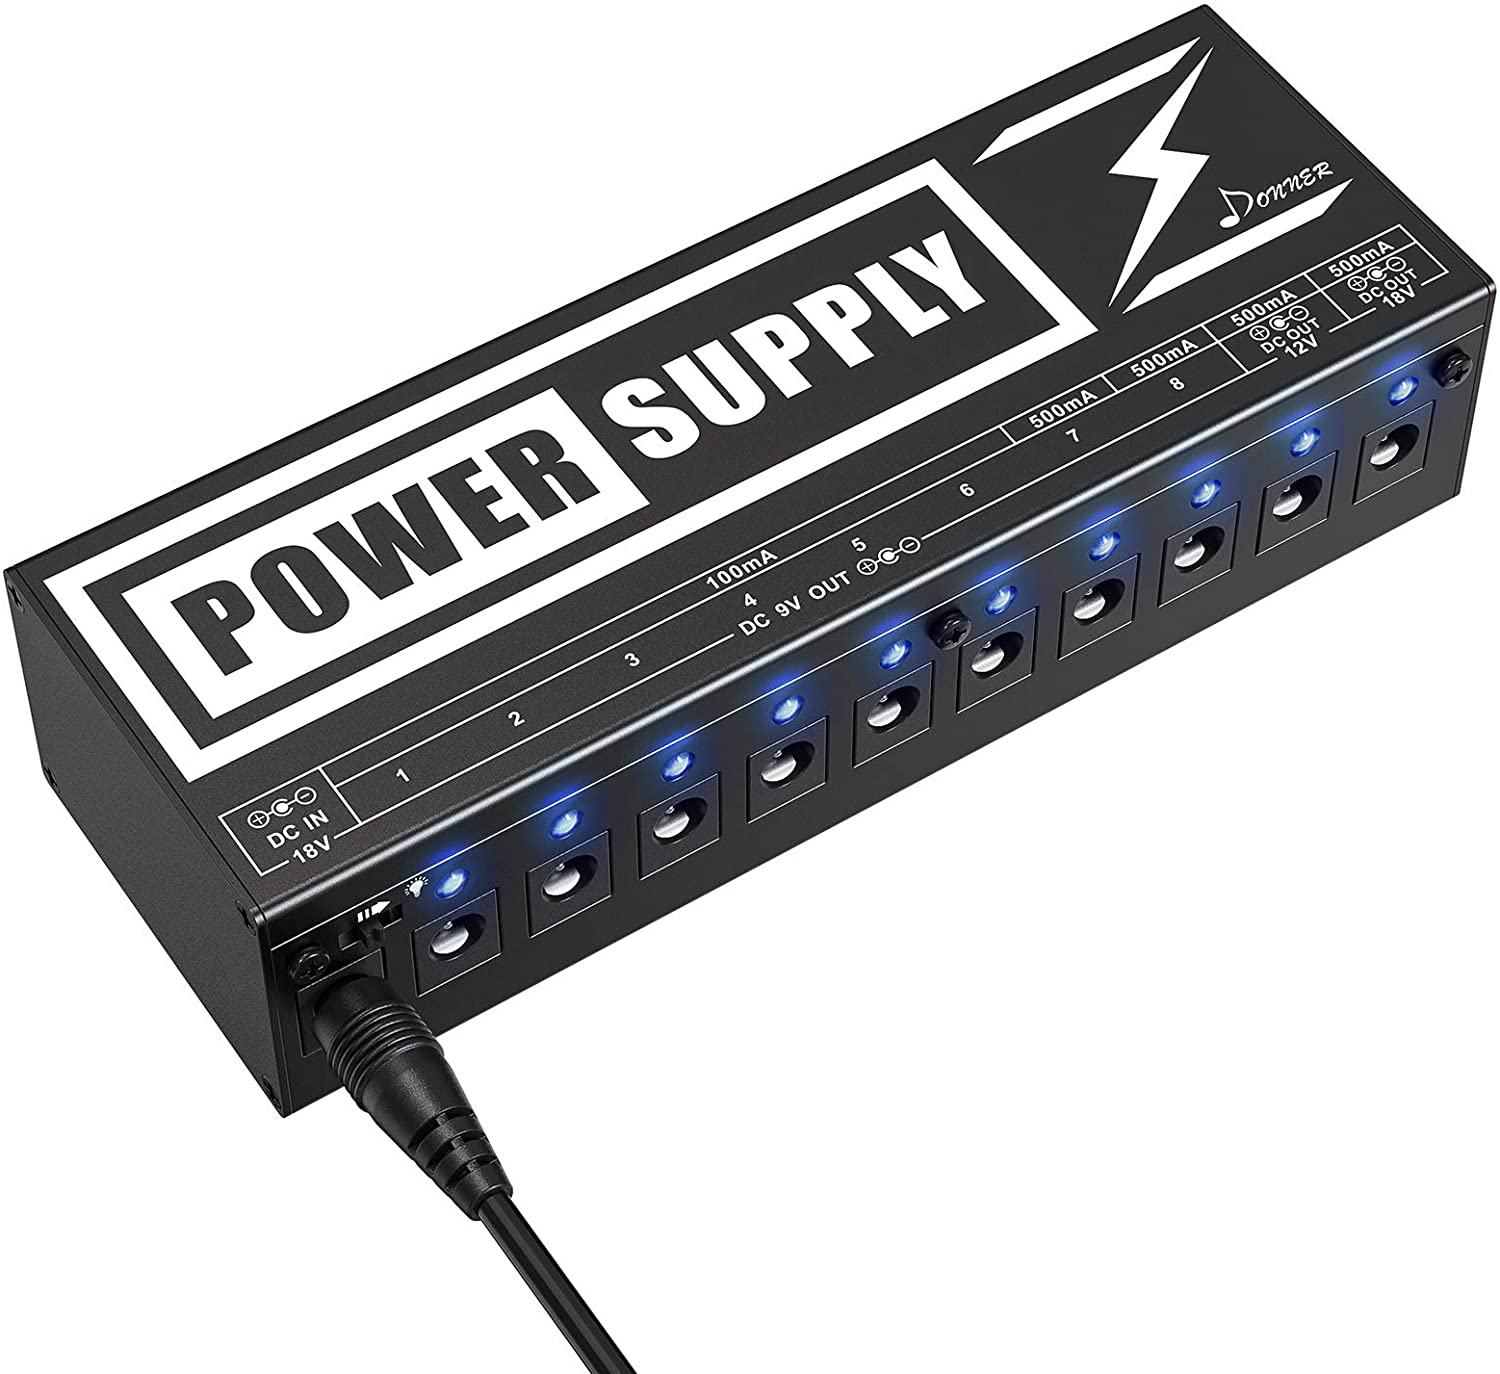 

Donner DP-2 Guitar Pedal Power Supply High Current 10 Isolated DC Output for 9V/12V/18V Effect Pedals